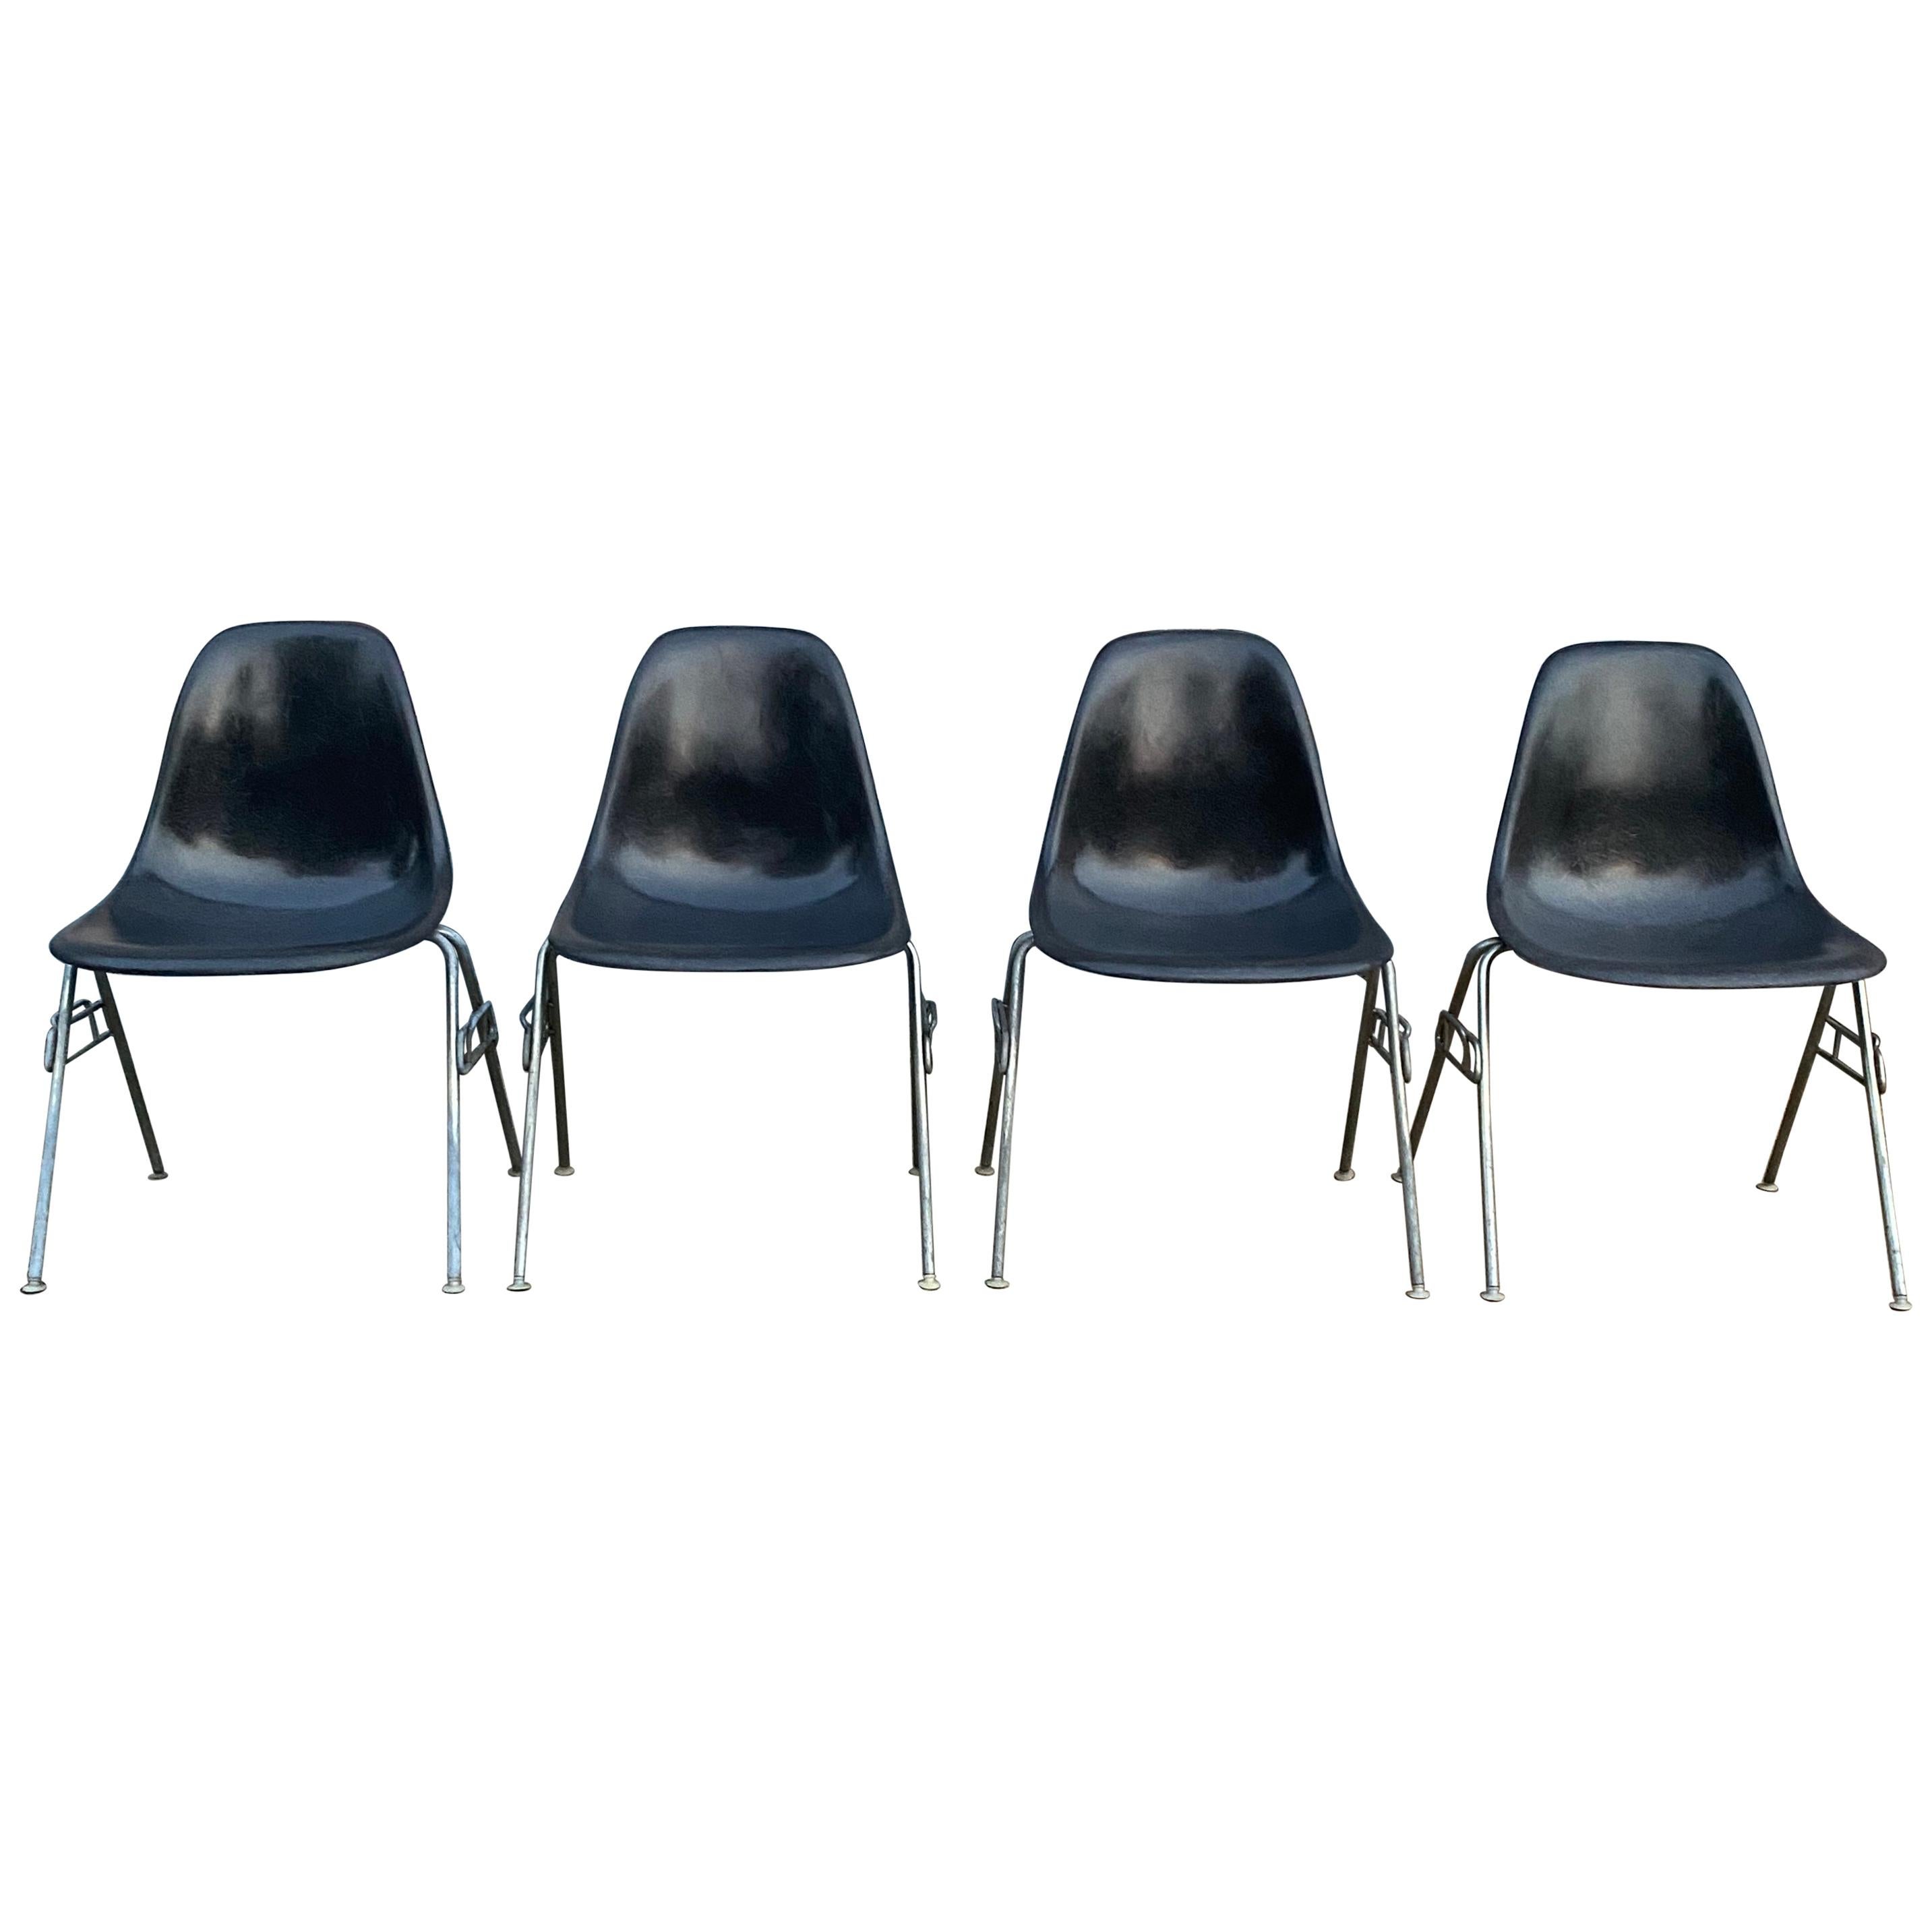 Set of 4 Herman Miller Eames Elephant Grey Stacking chairs